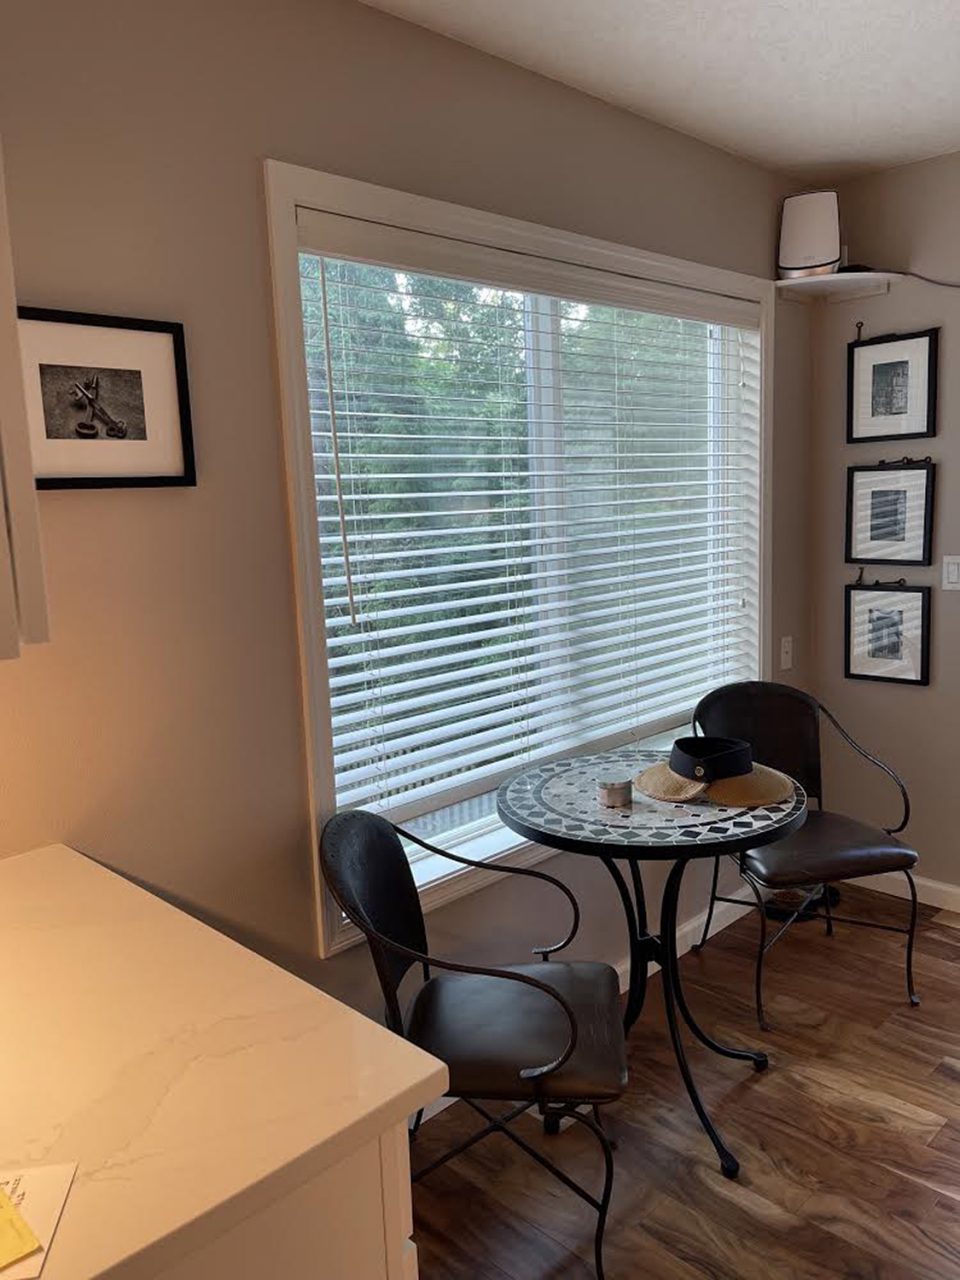 This view of the breakfast nook shows three Keith Dotson photographs along the right wall and another on the far left.